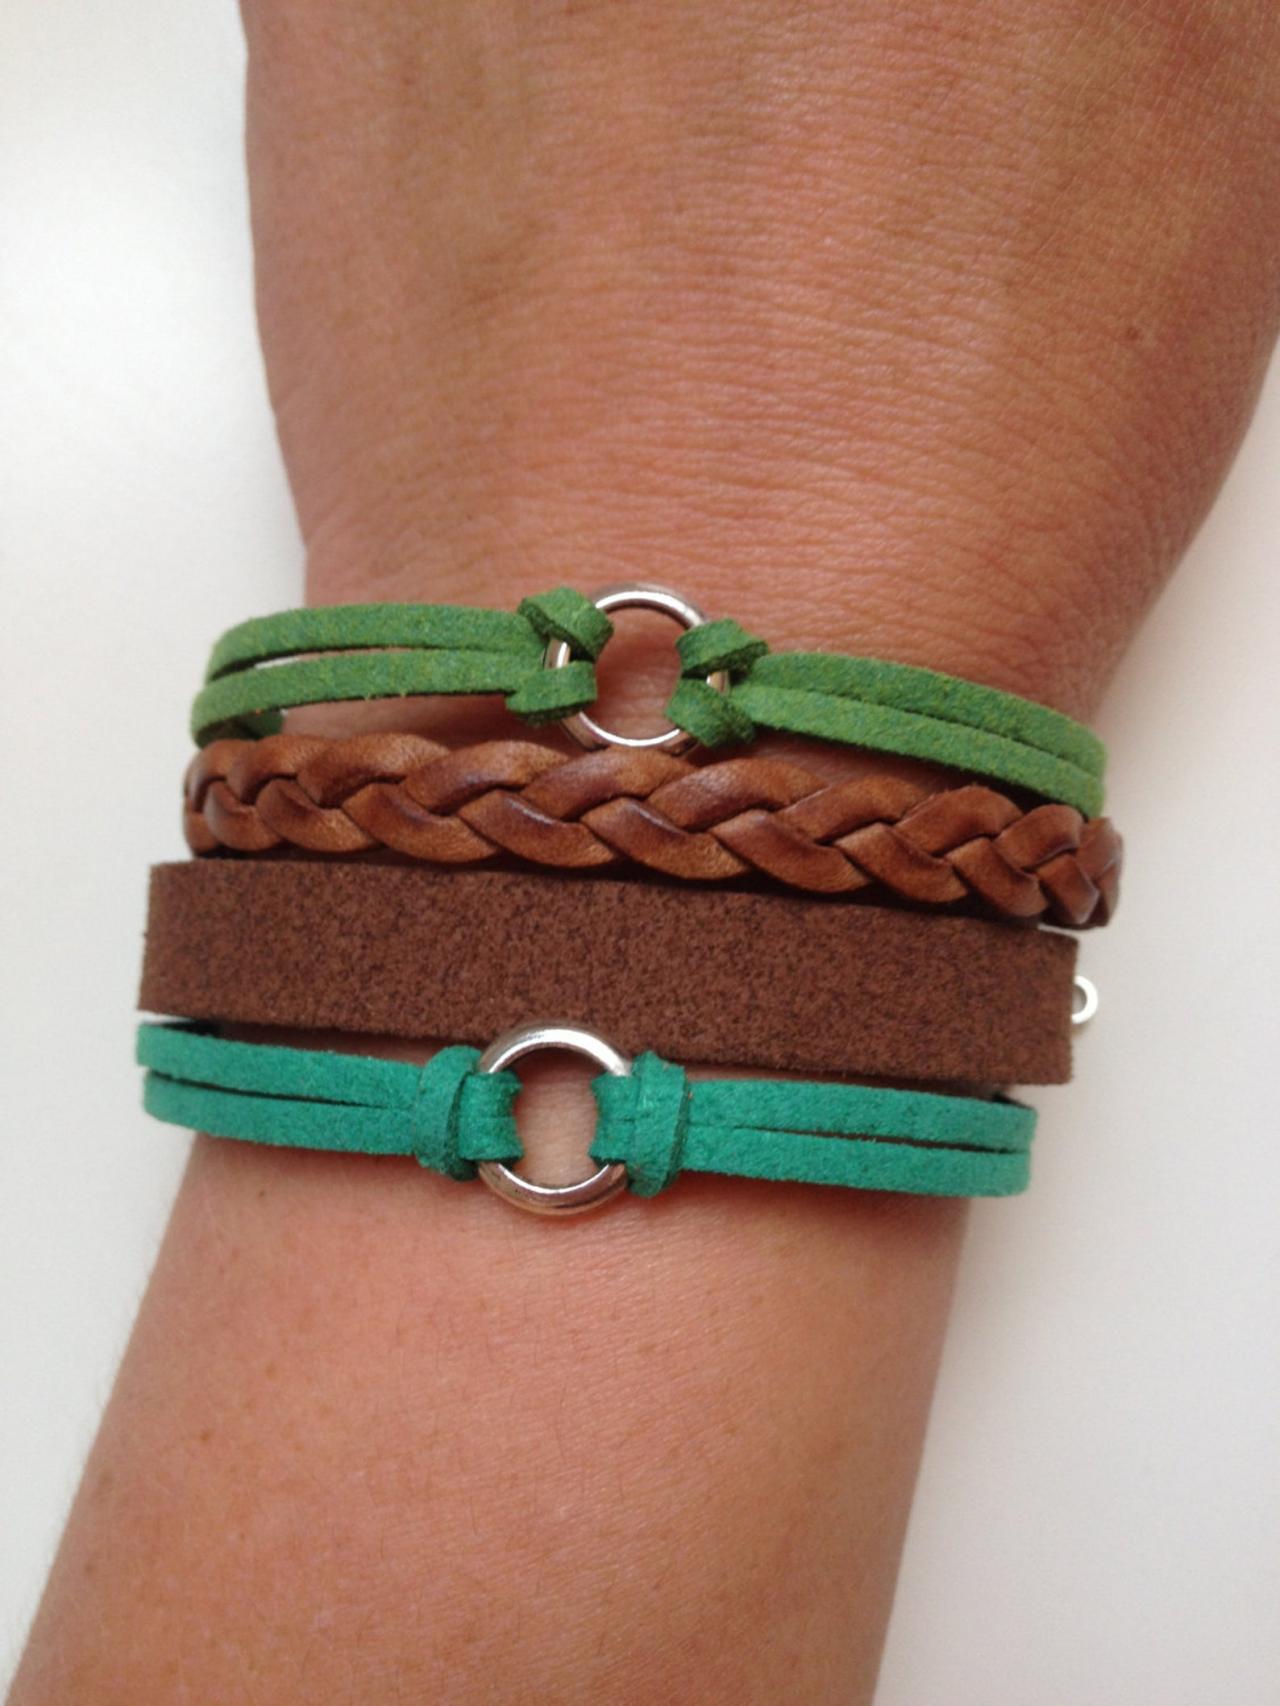 Leather Bracelet 35 - Friendship Cuff Rings Bracelet Brown Green Leather Braid Gift Adjustable Current Womenswear Unique Innovative